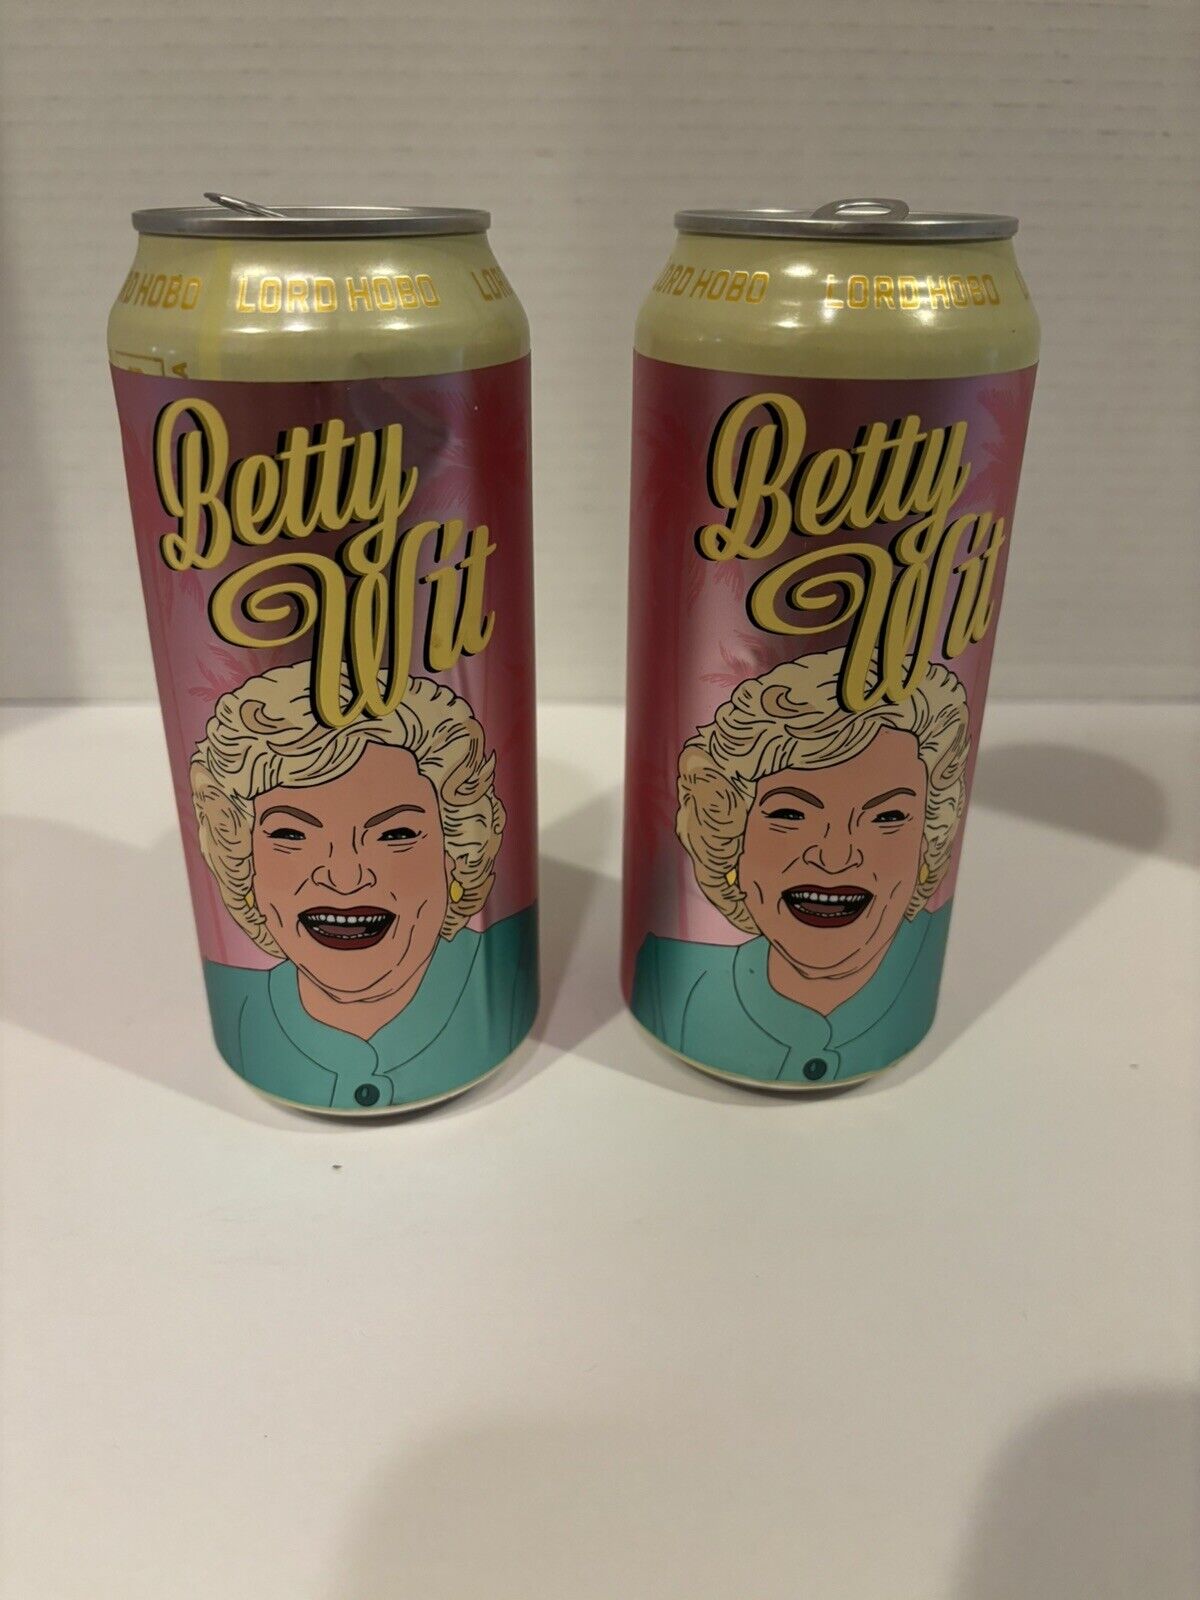 Two Betty White (Wit) Beer Cans-Lord Hobo Brewing-Woburn, MA-Golden Girls-Rare